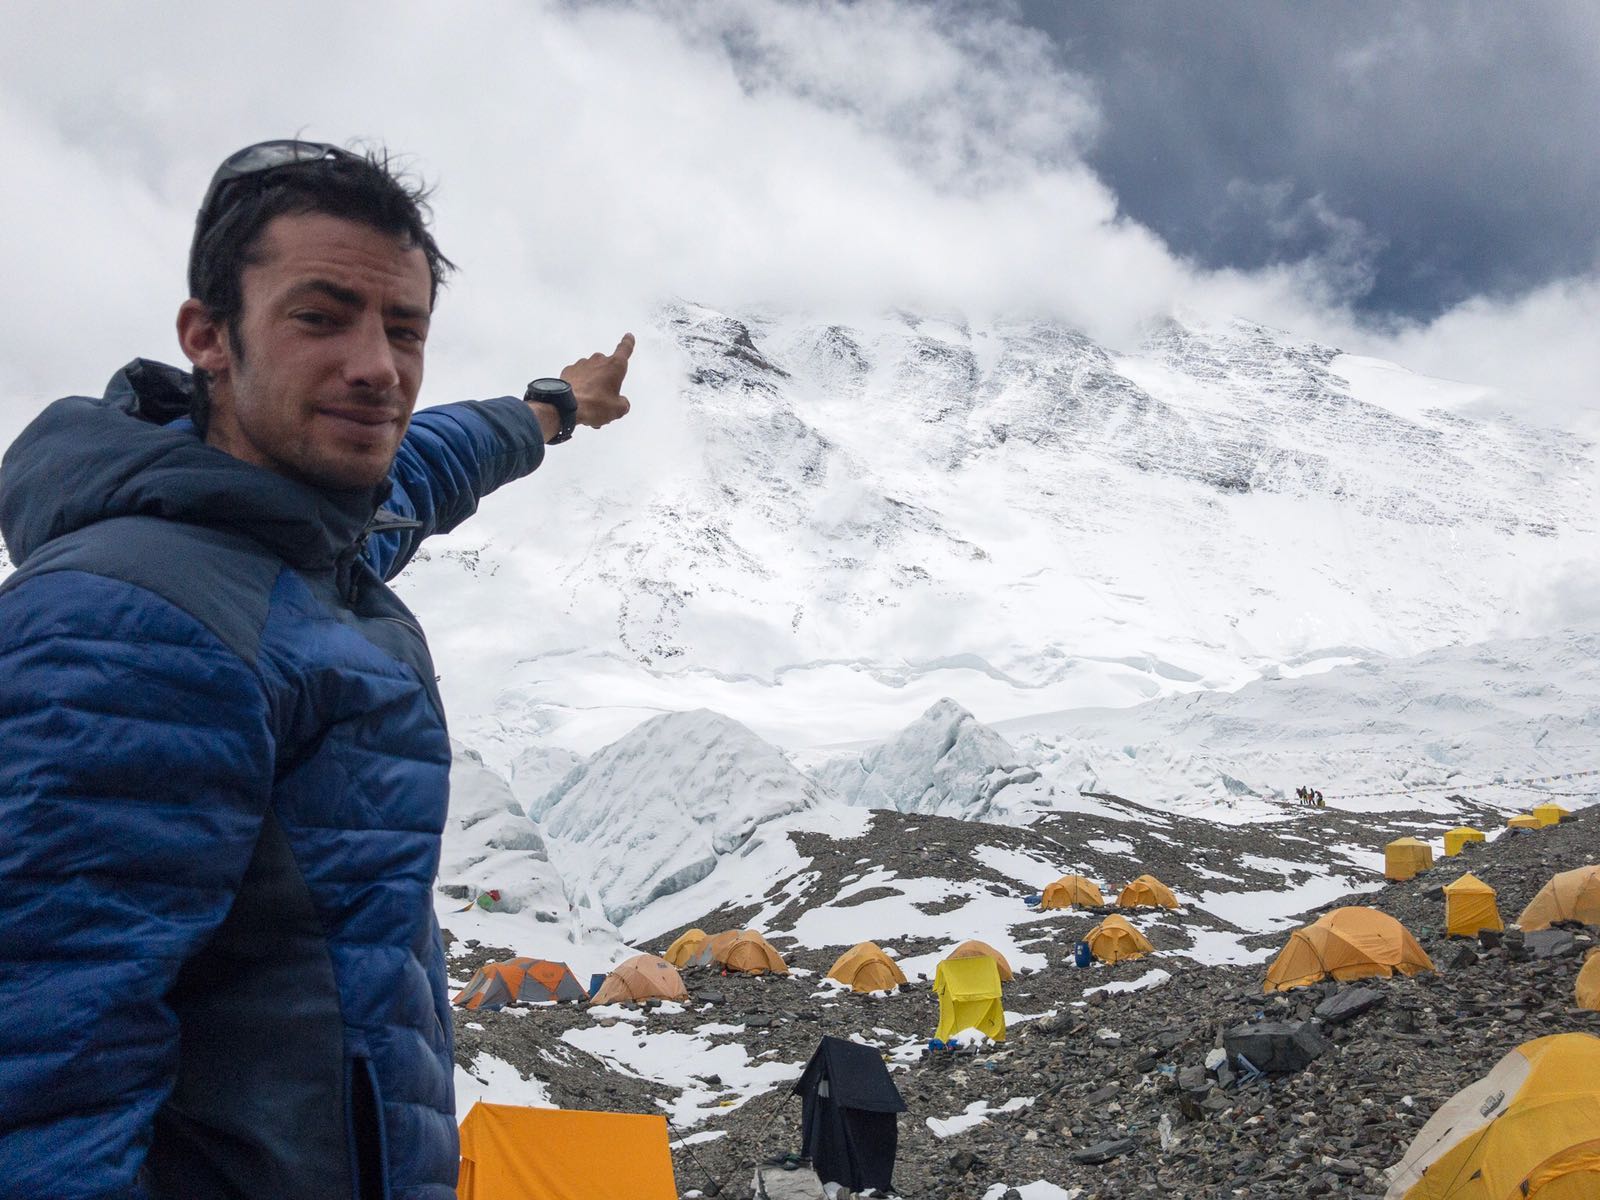 Kilian Jornet points to Mt. Everest's shrouded summit while acclimatizing for his first speed ascent of the North Col route. [Photo] Sebastien Montaz-Rosset/Kilian Jornet collection